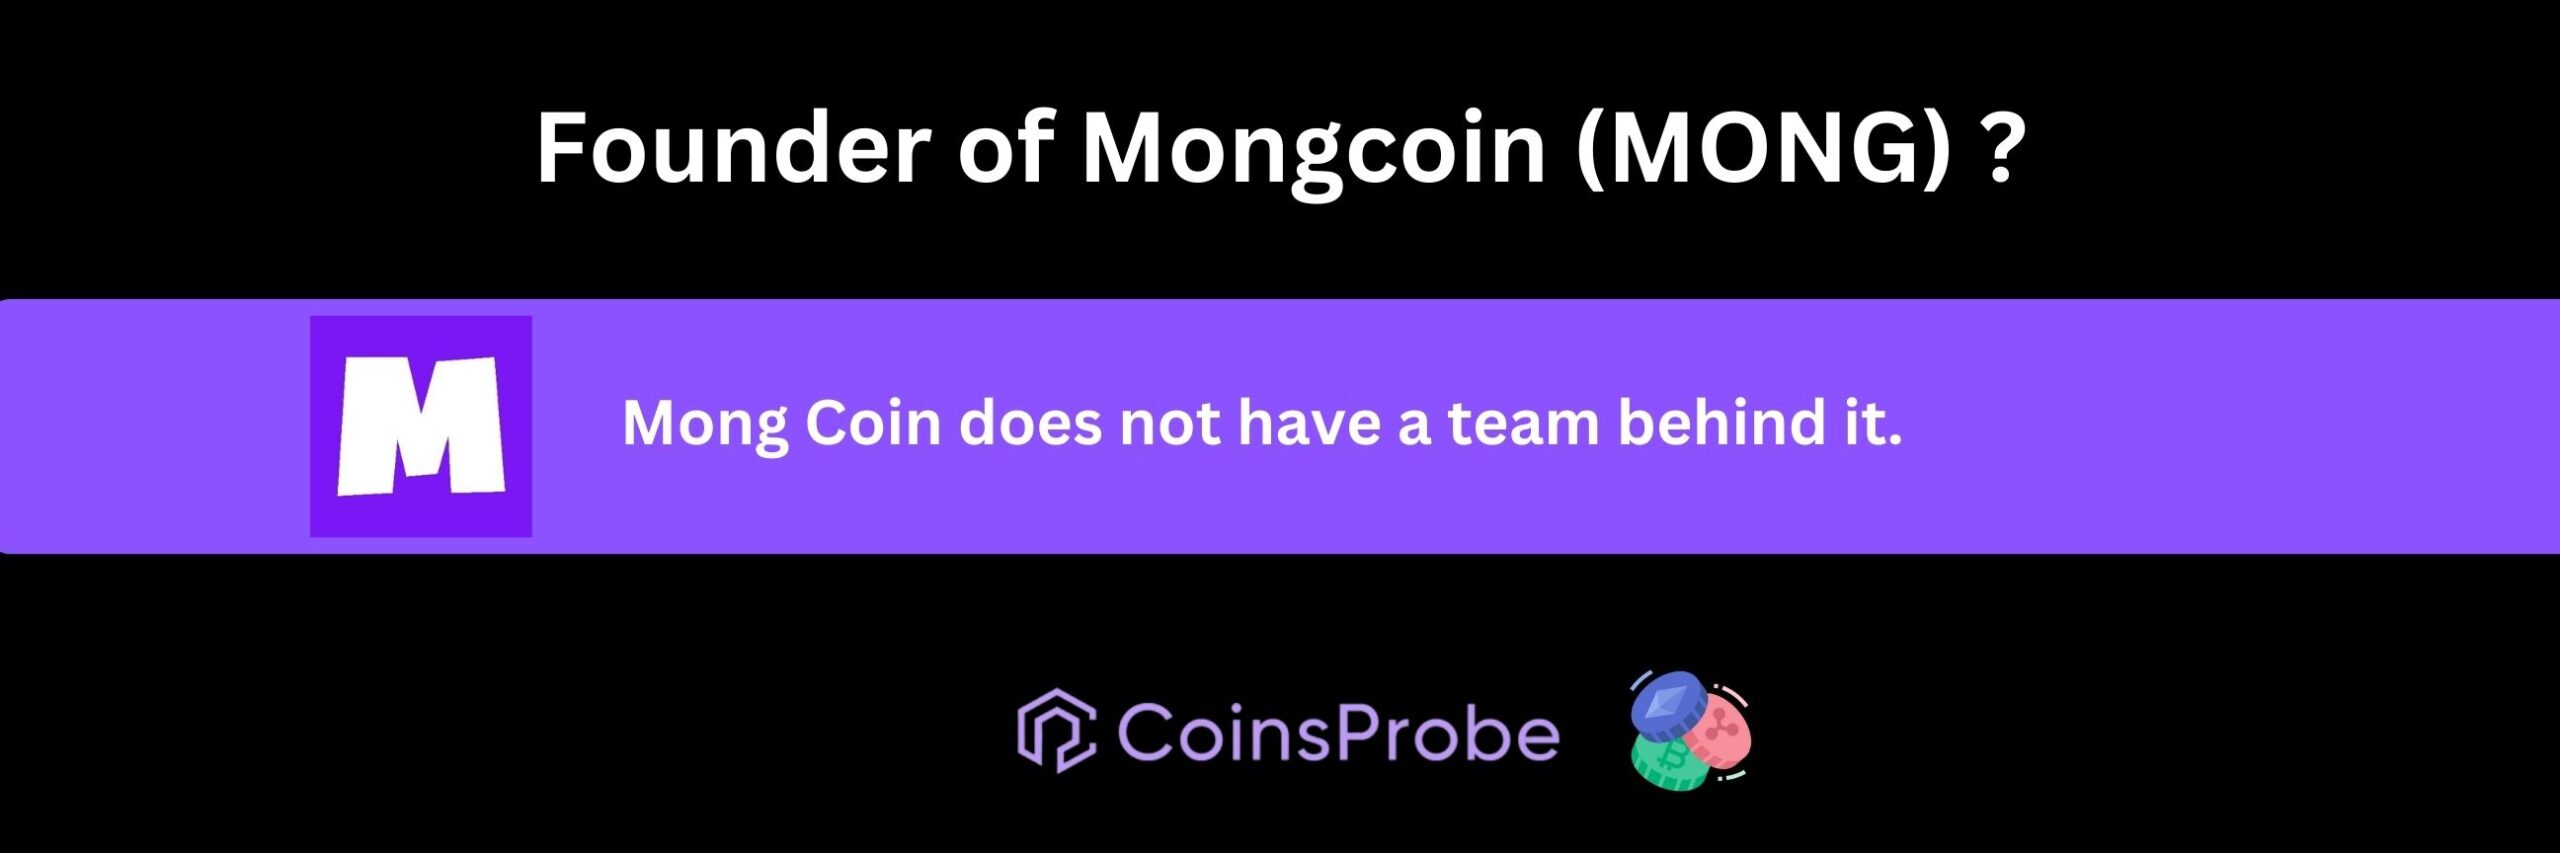 Who is The Founder of Mongcoin (MONG) ?